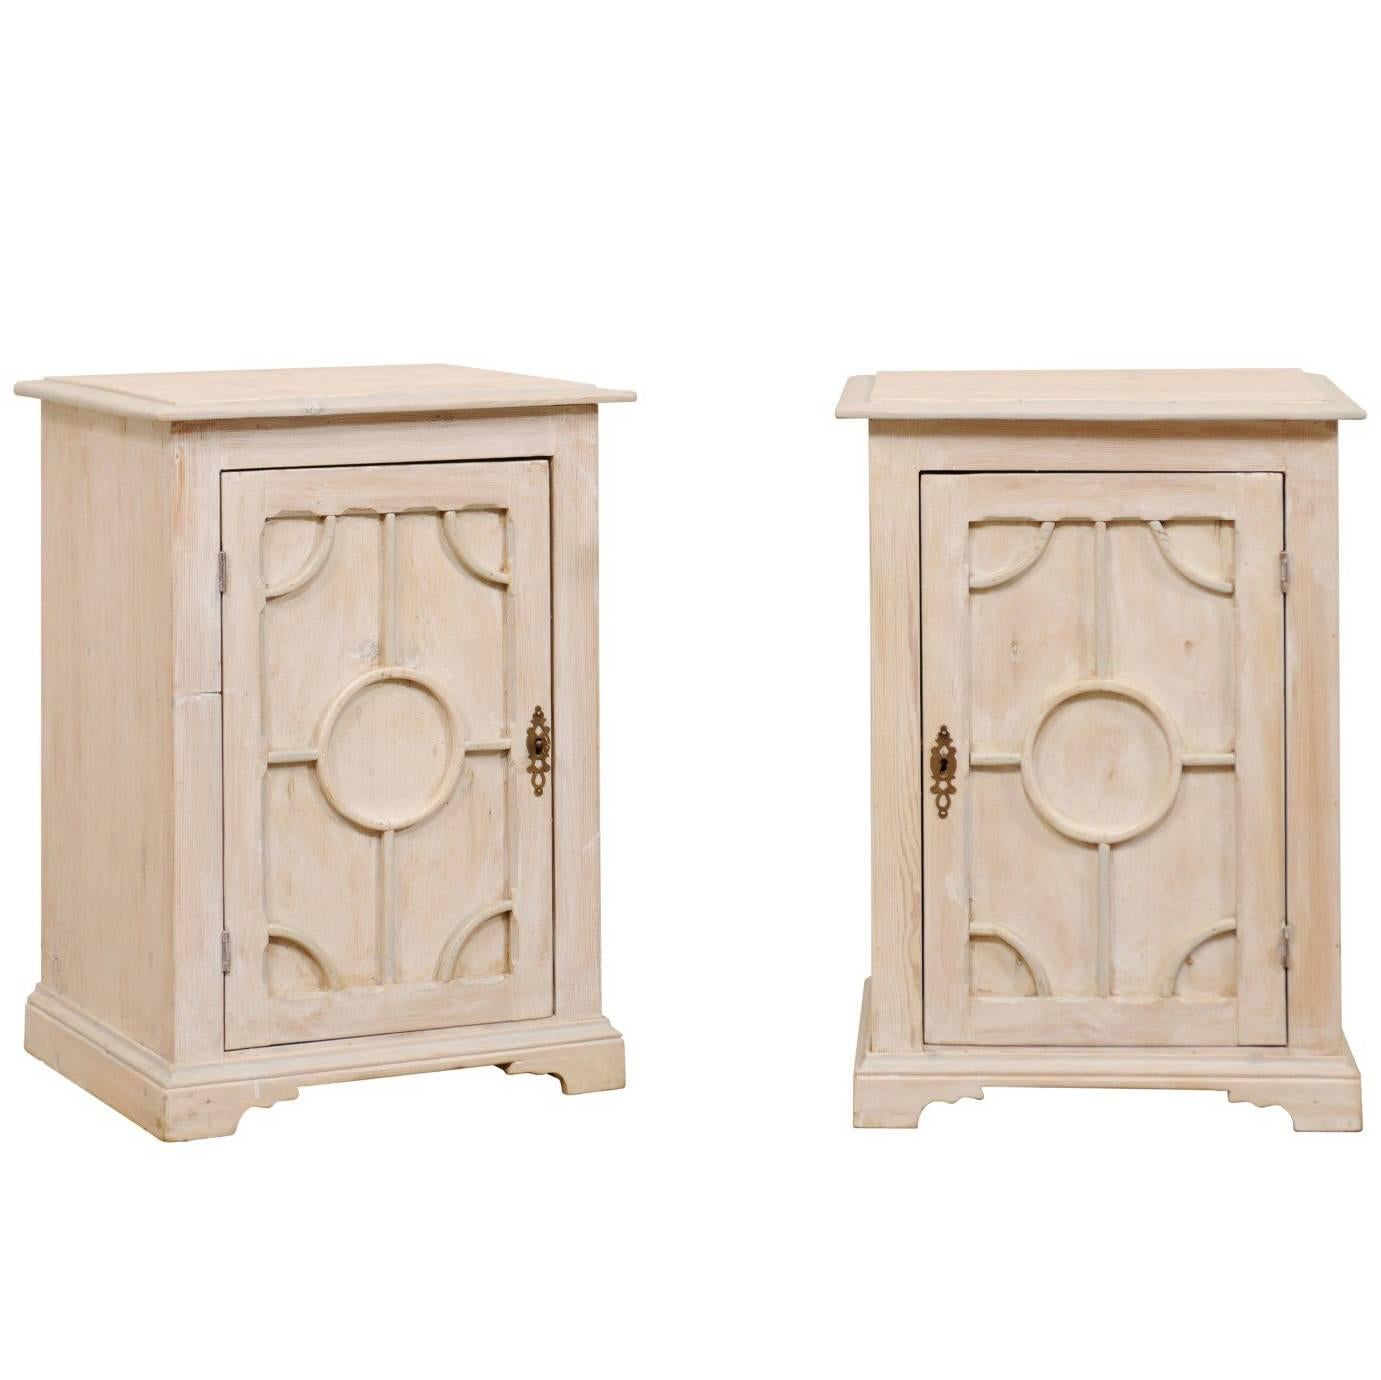 Pair of English Mid-20th Century Painted Wood Side Tables with Understated Trim